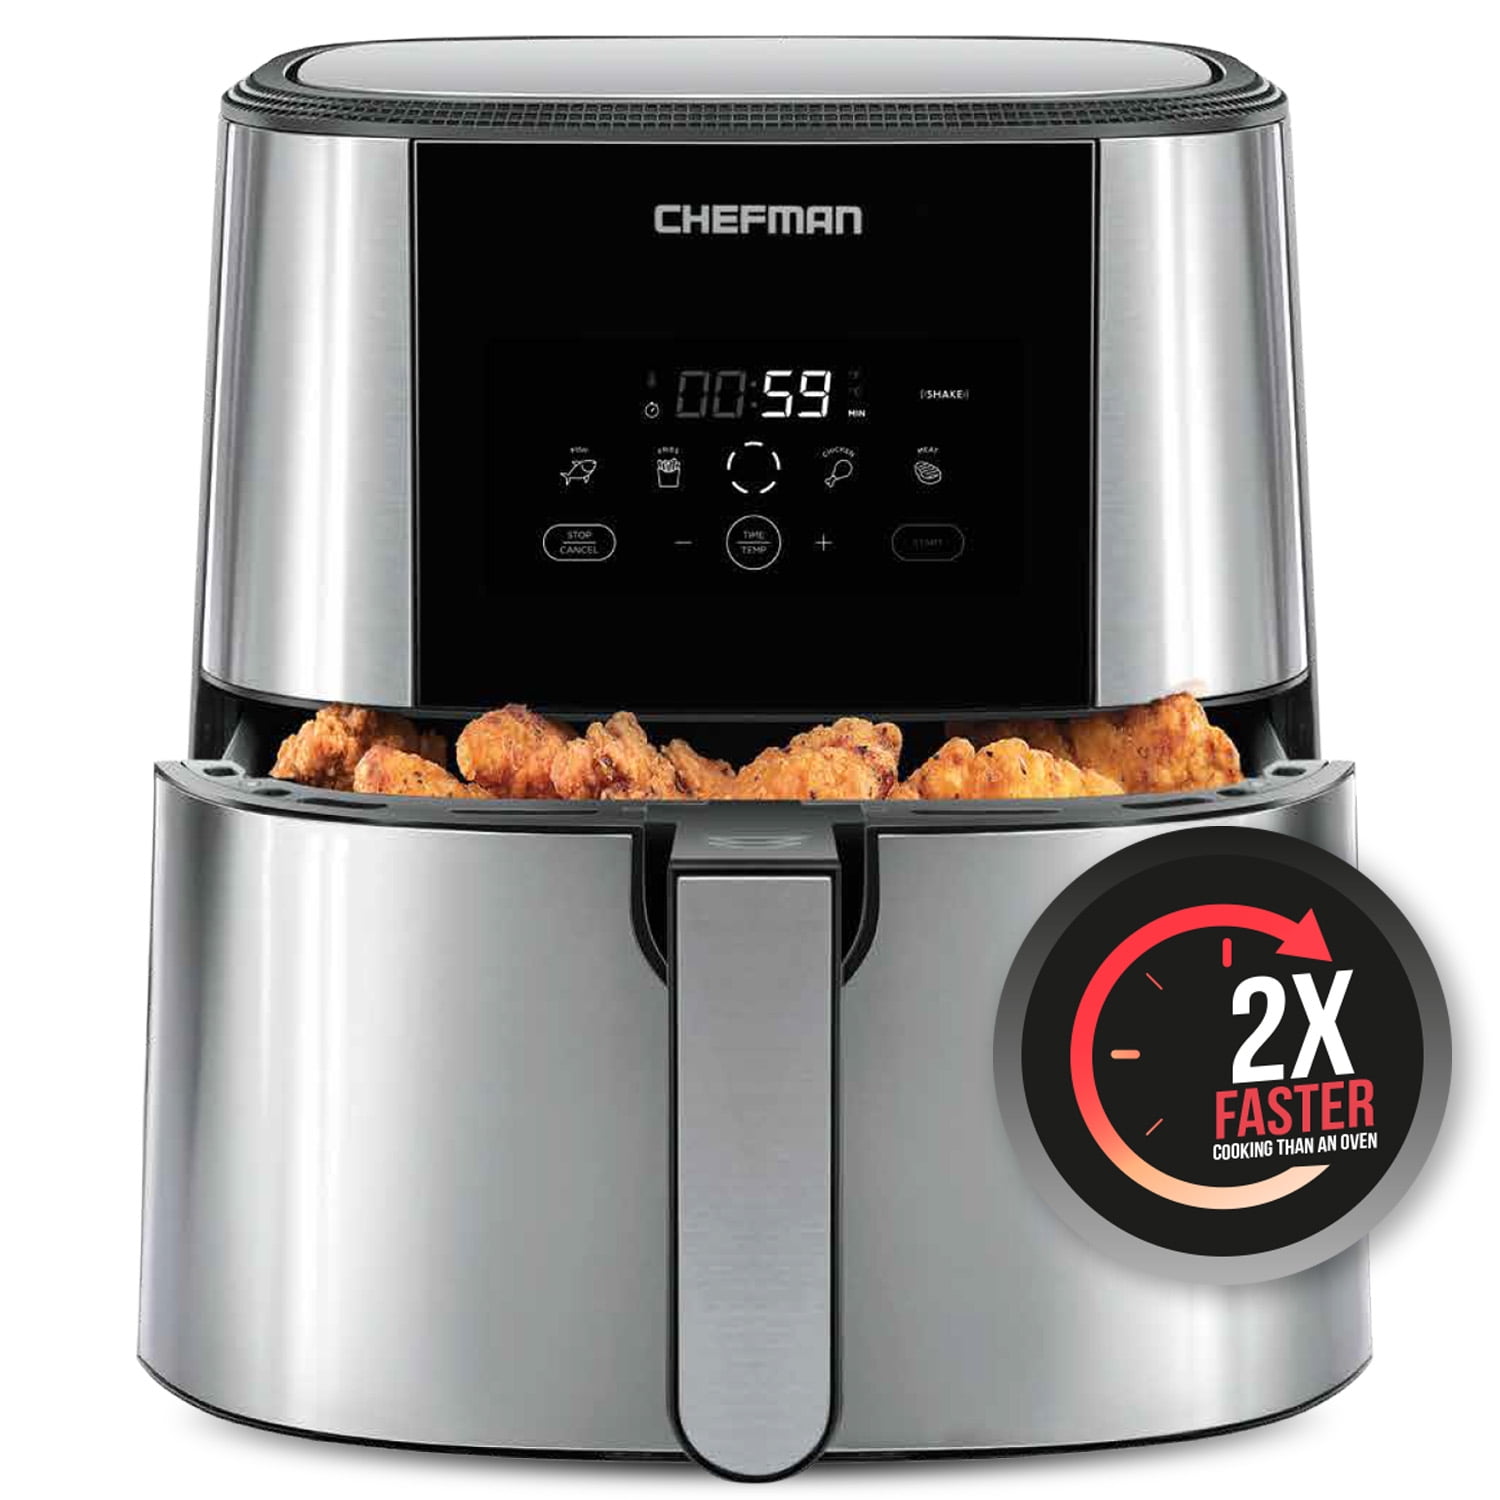 unbox my new airfryer with me! after finding out our most used kitchen, Chefman Airfryer